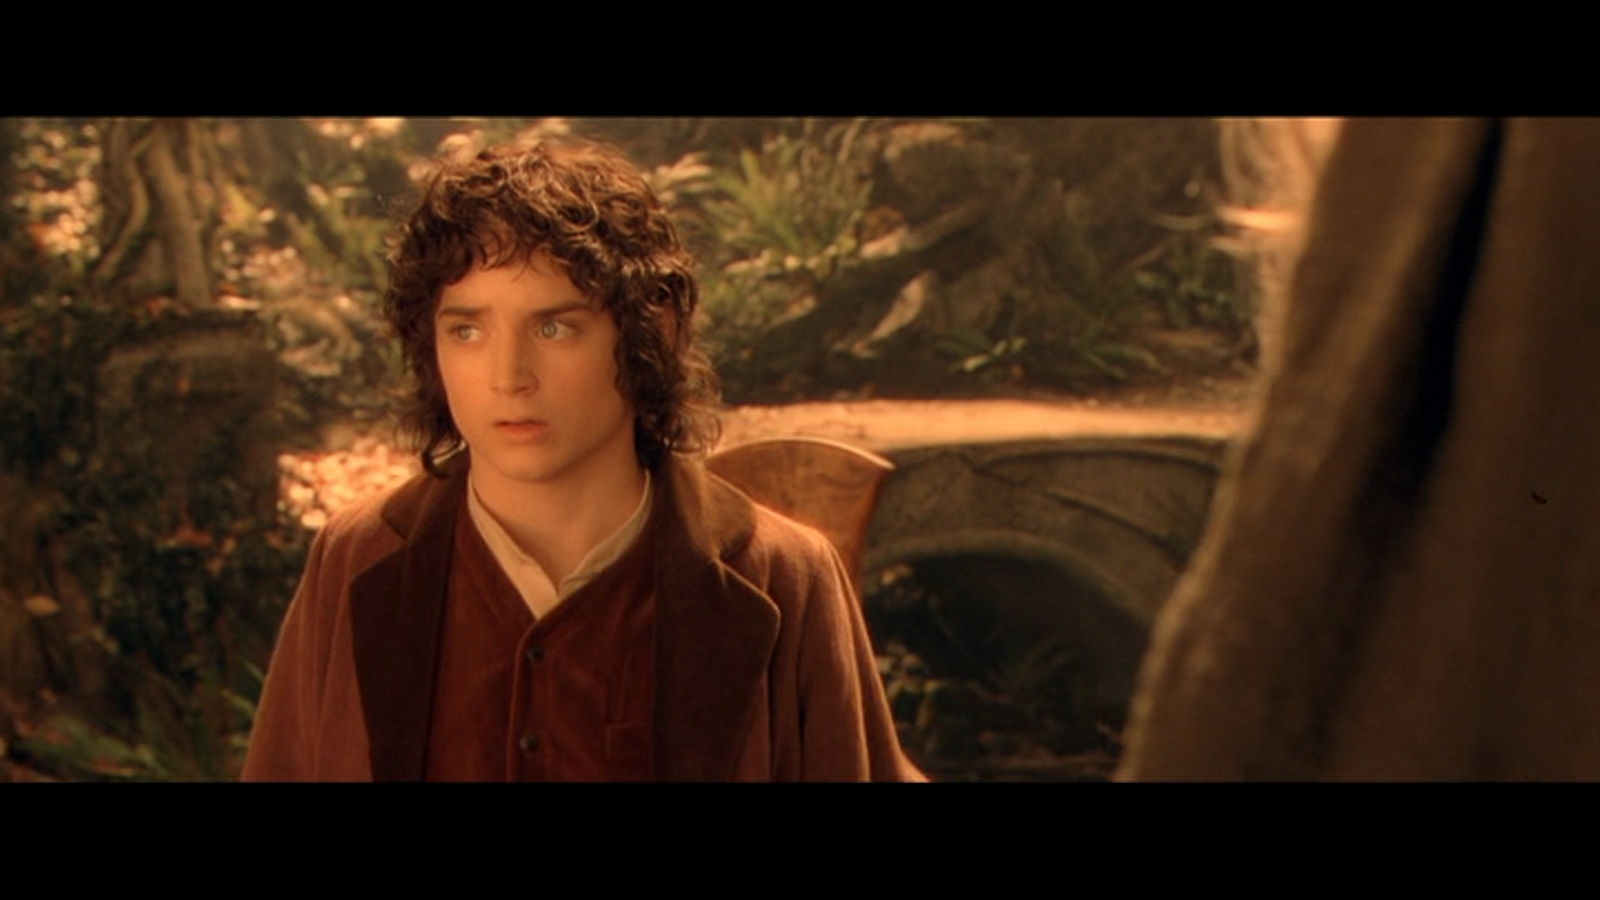 instal the new for android The Lord of the Rings: The Fellowship…